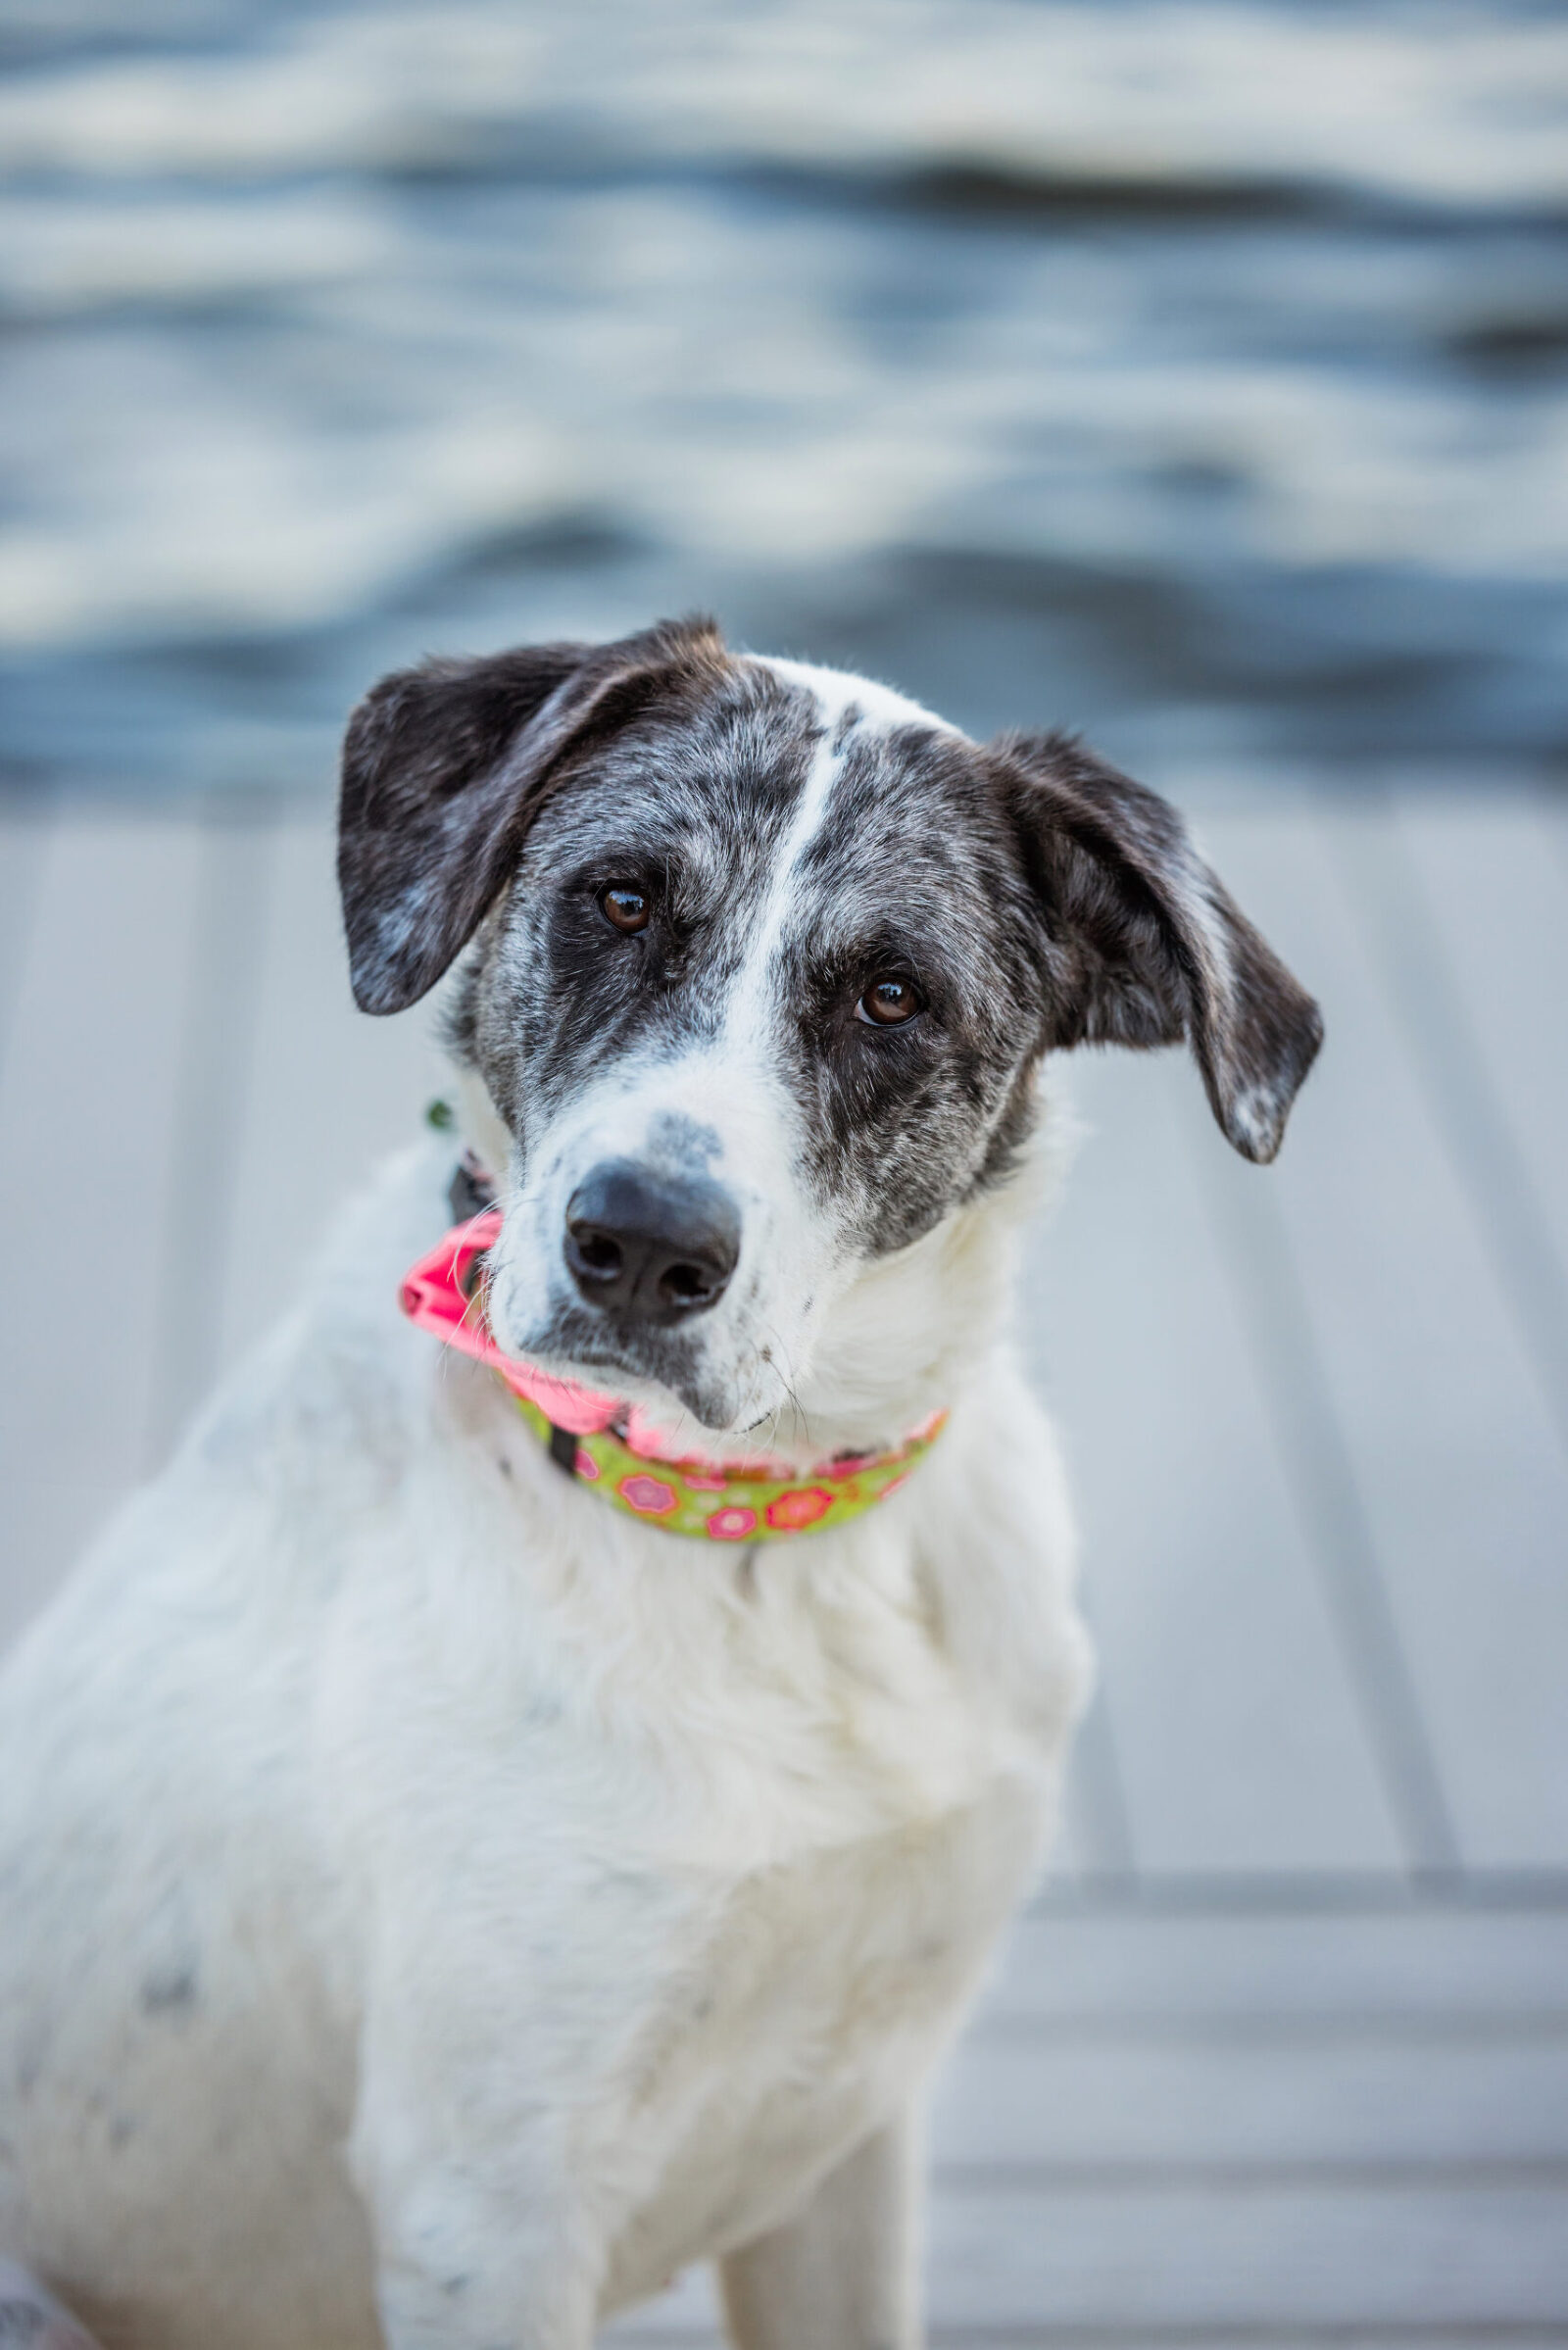 A white and black speckled dog with a pink floral collar looking at the camera, with a blurred water background.